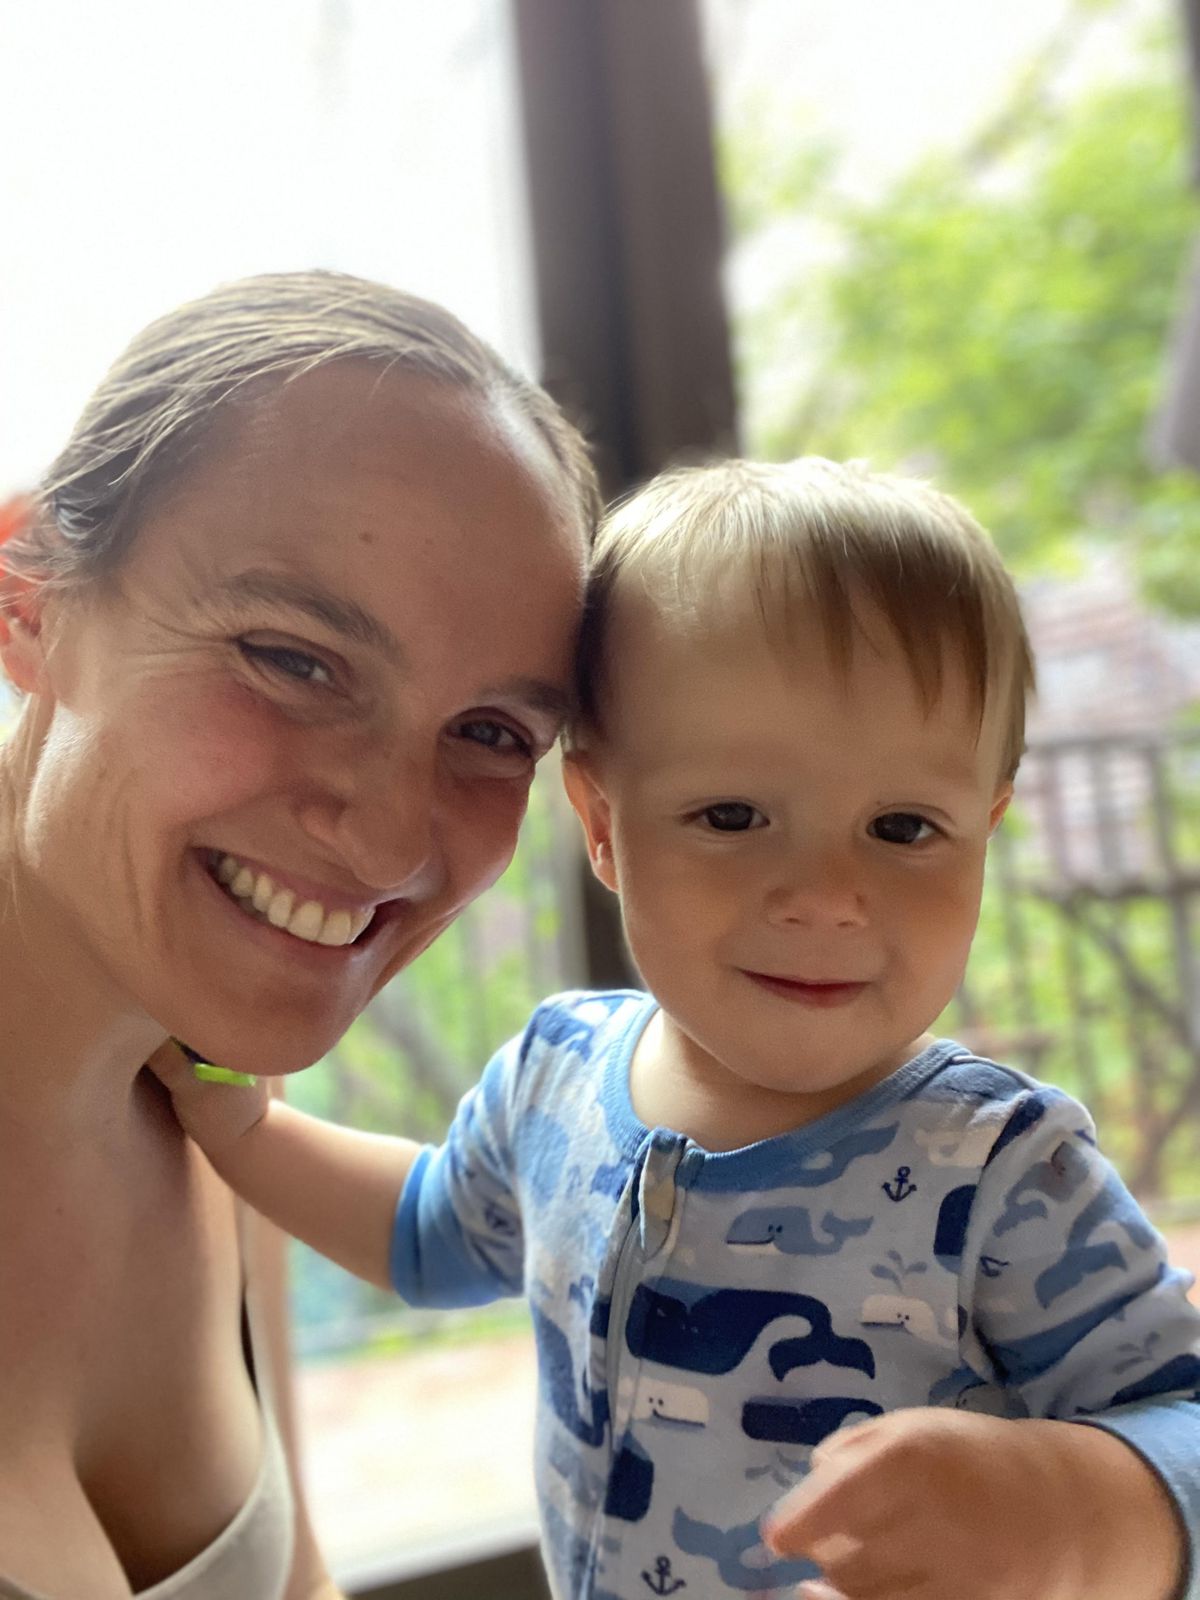 A photo of Anne Hanger with her toddler son, posing in front of a window.